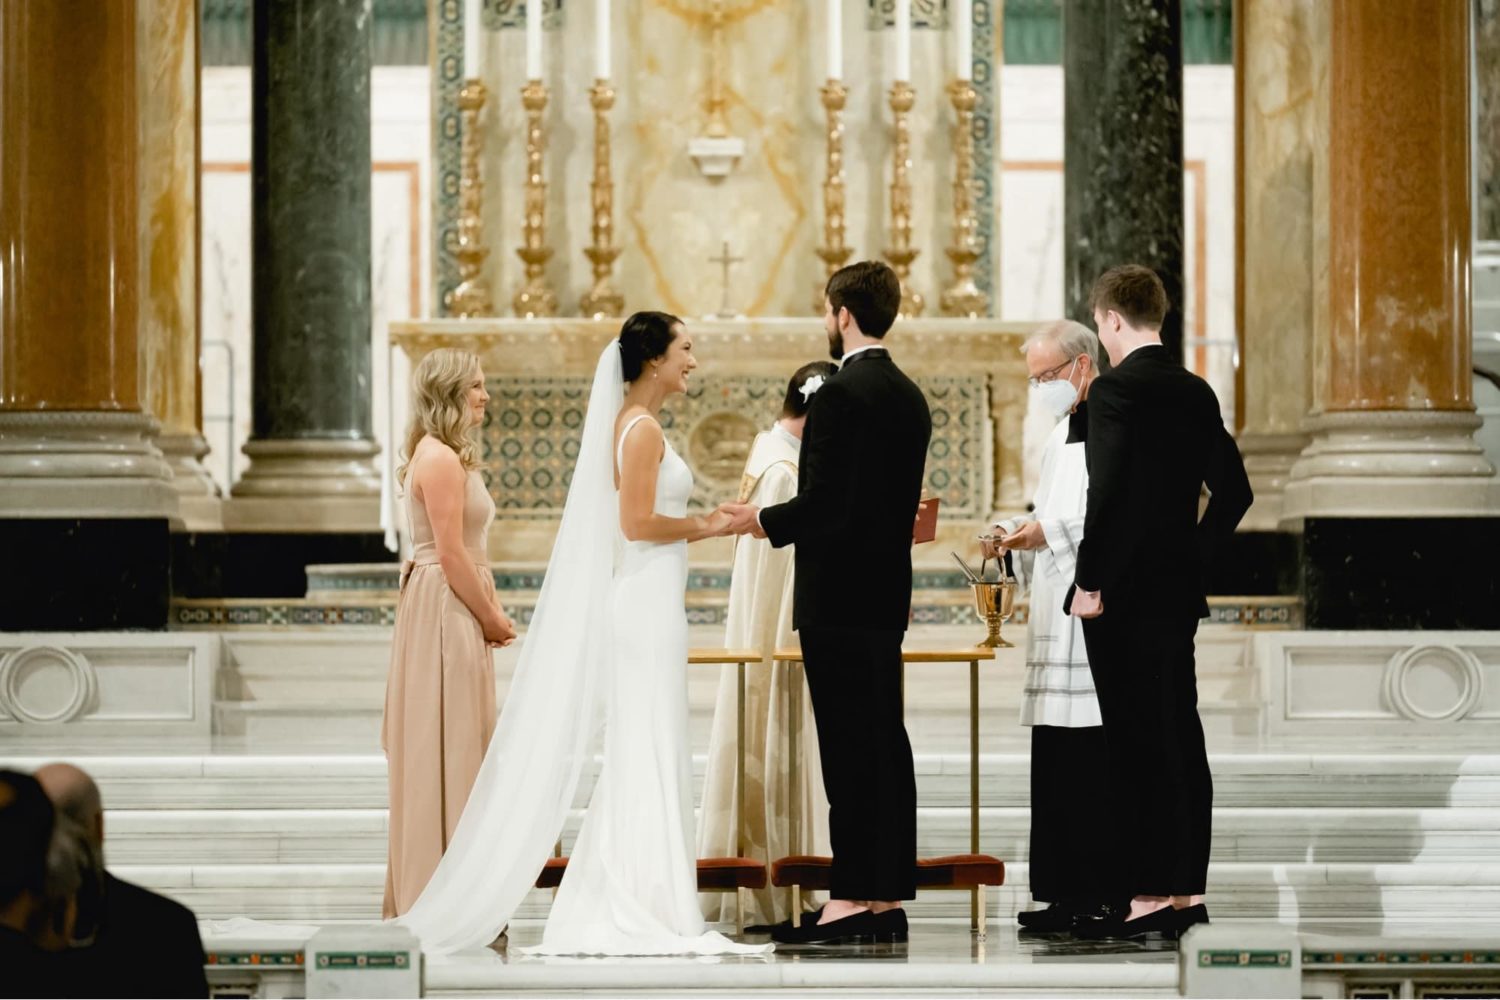 The cathedral basilica of St. Louis wedding photos